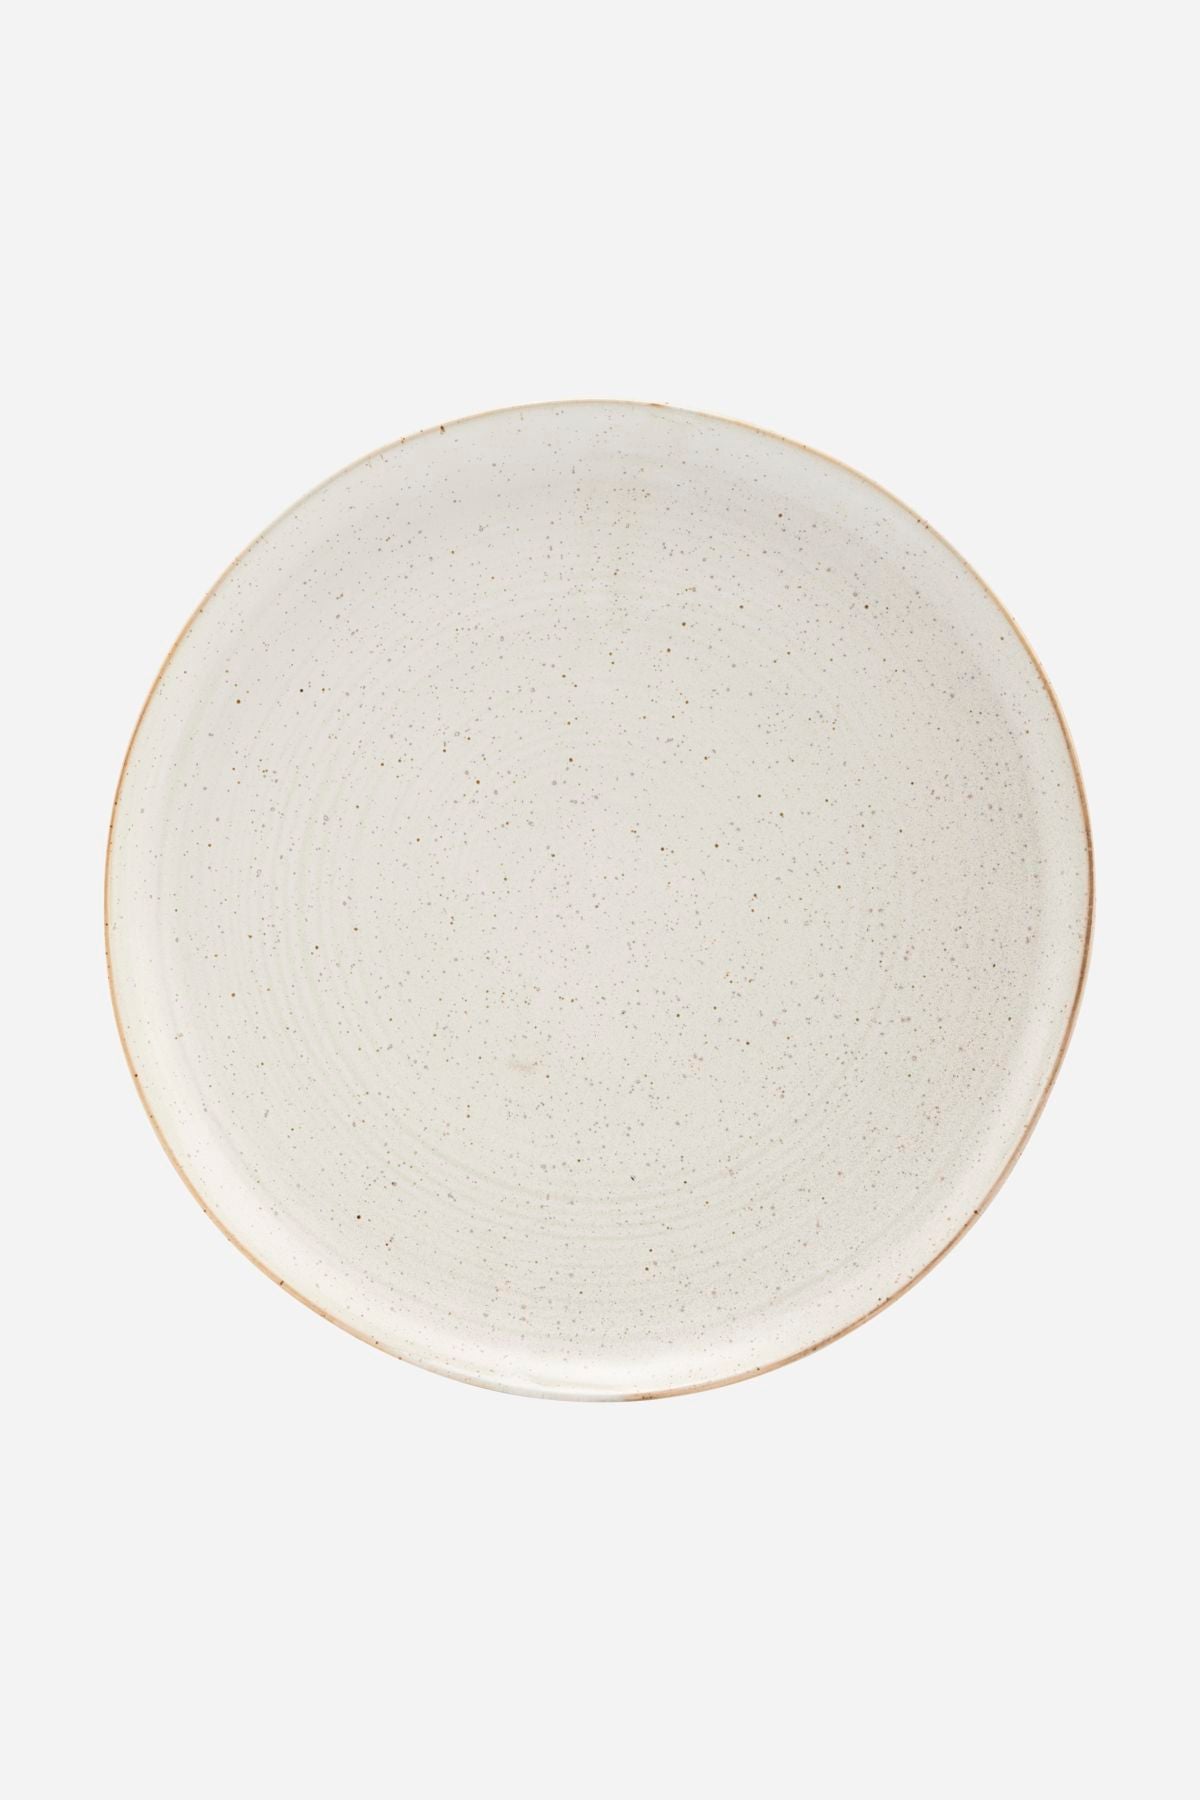 Dinner Plate | Pion | Grey Speckled Glaze | by House Doctor - Lifestory - House Doctor